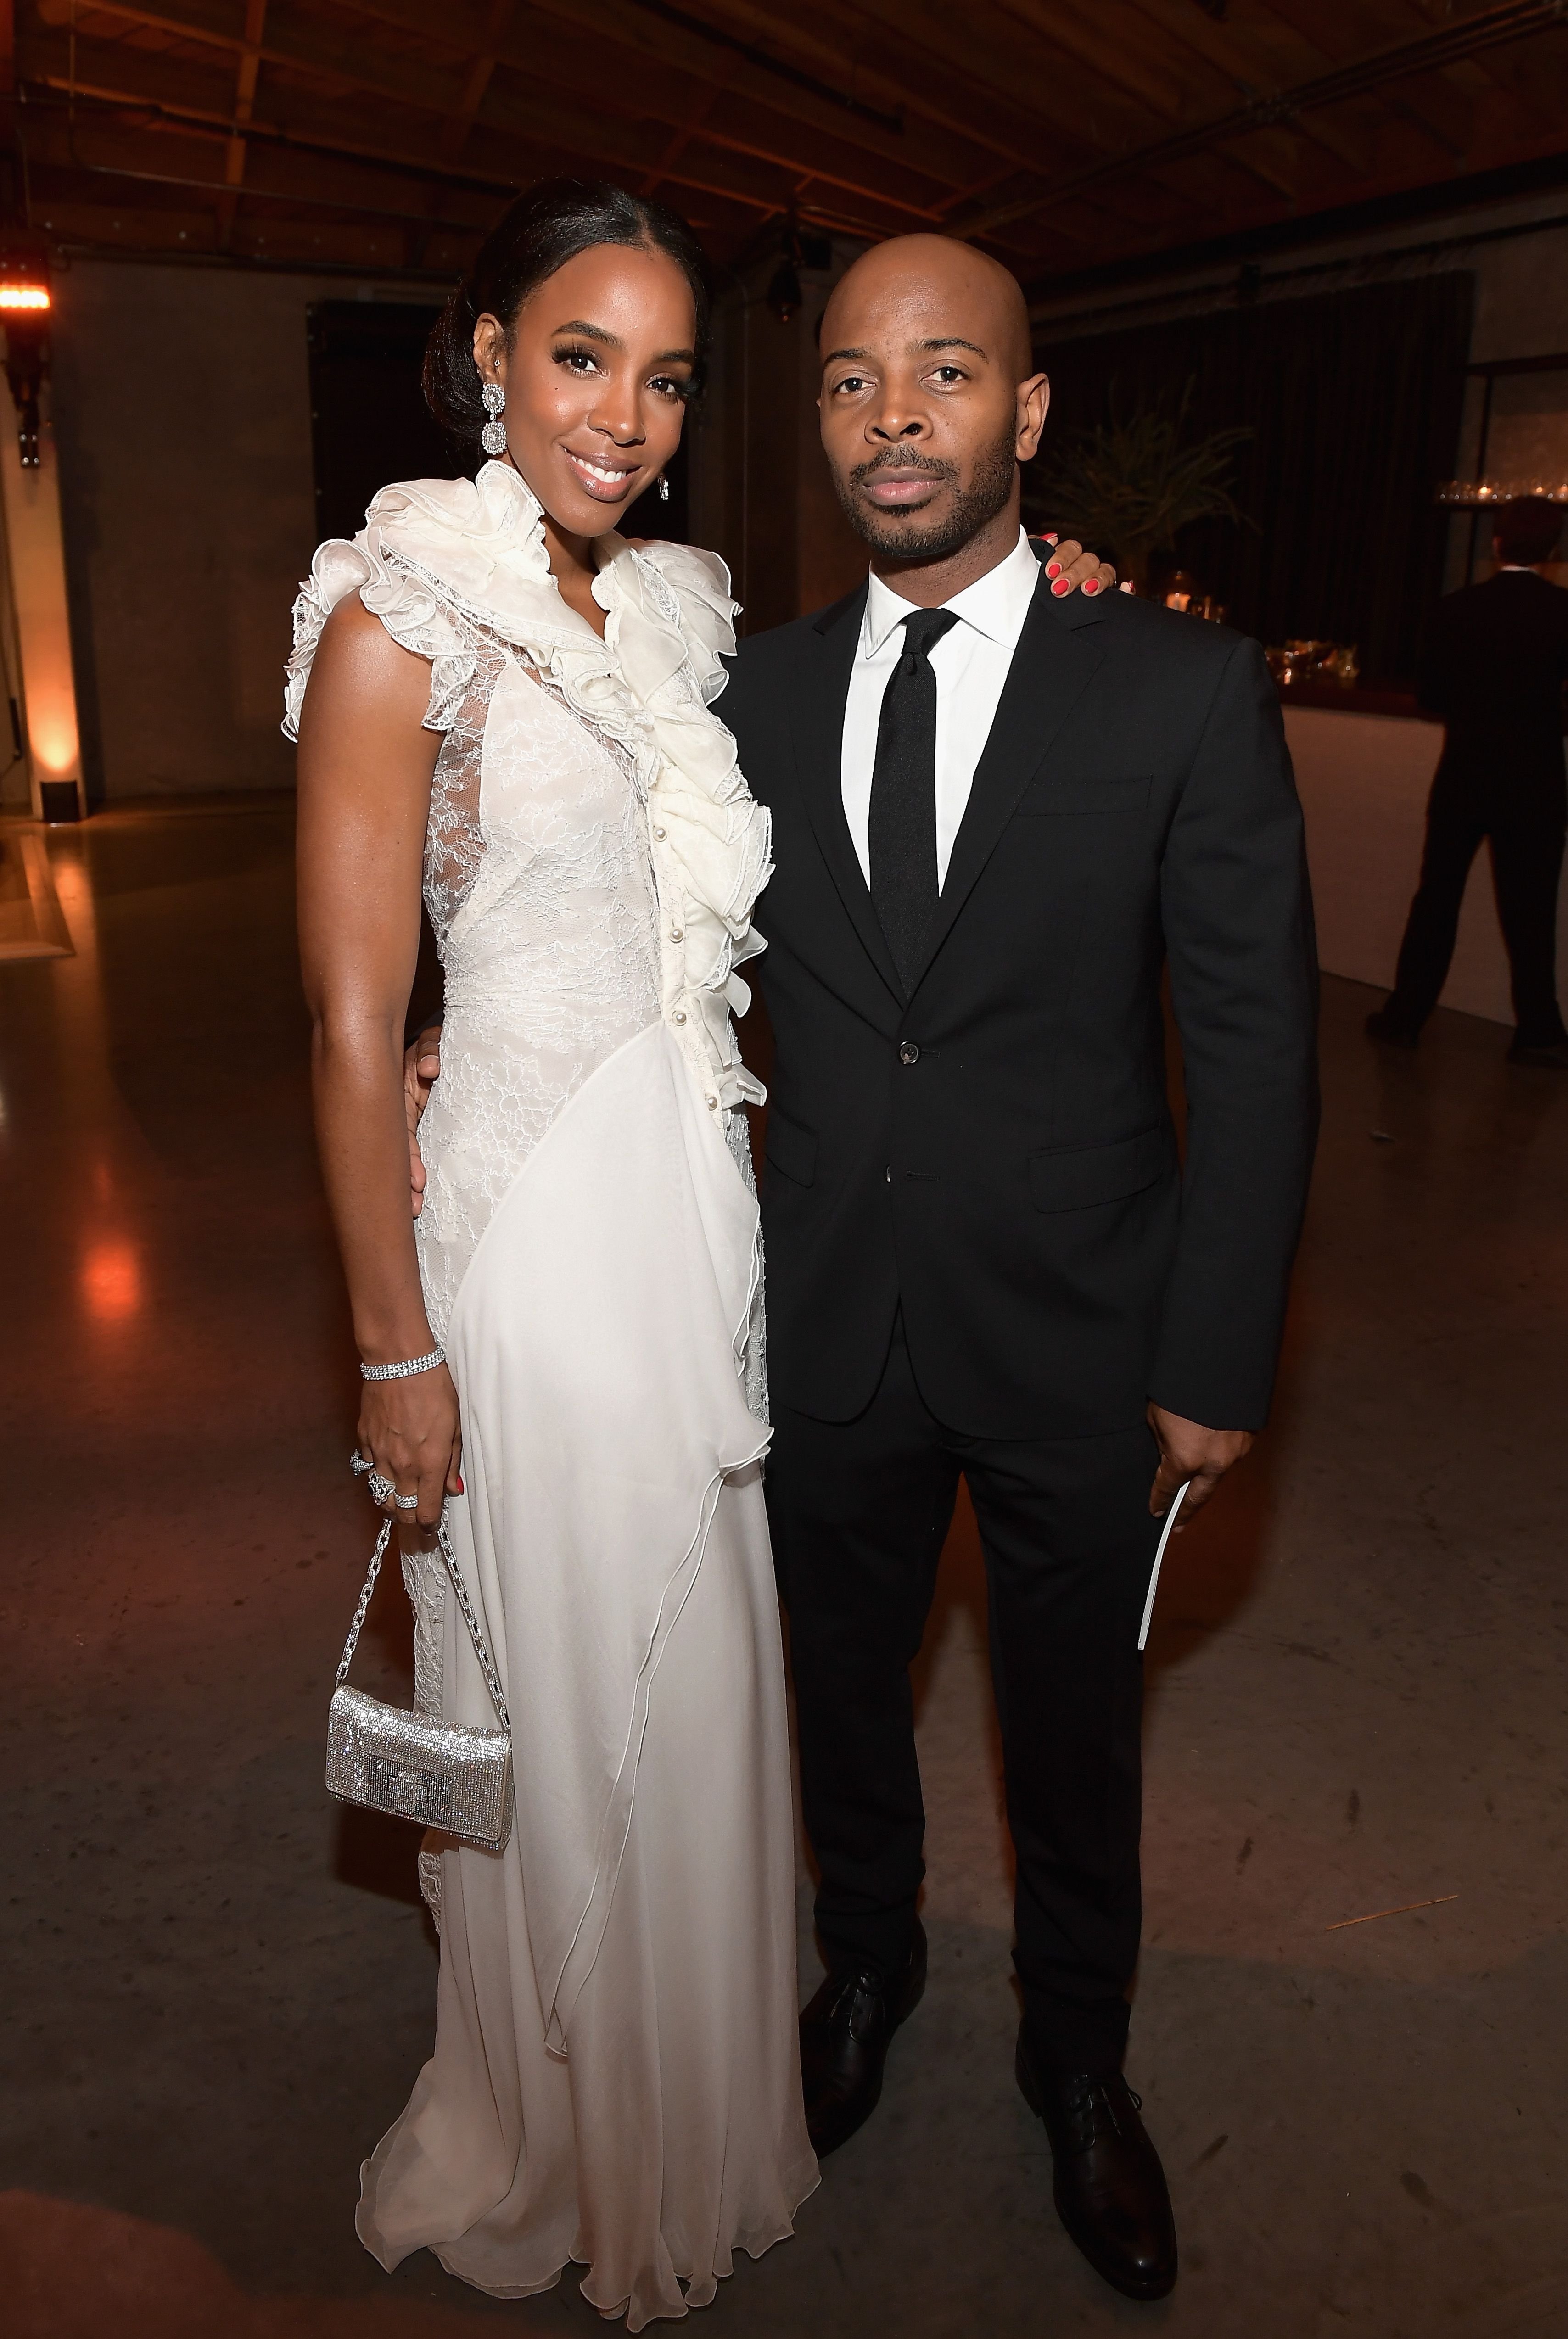 Kelly Rowland with husband Tim Weatherspoon at the 2017 Baby2Baby Gala presented by Paul Mitchell in Los Angeles, California | Photo: Getty Images